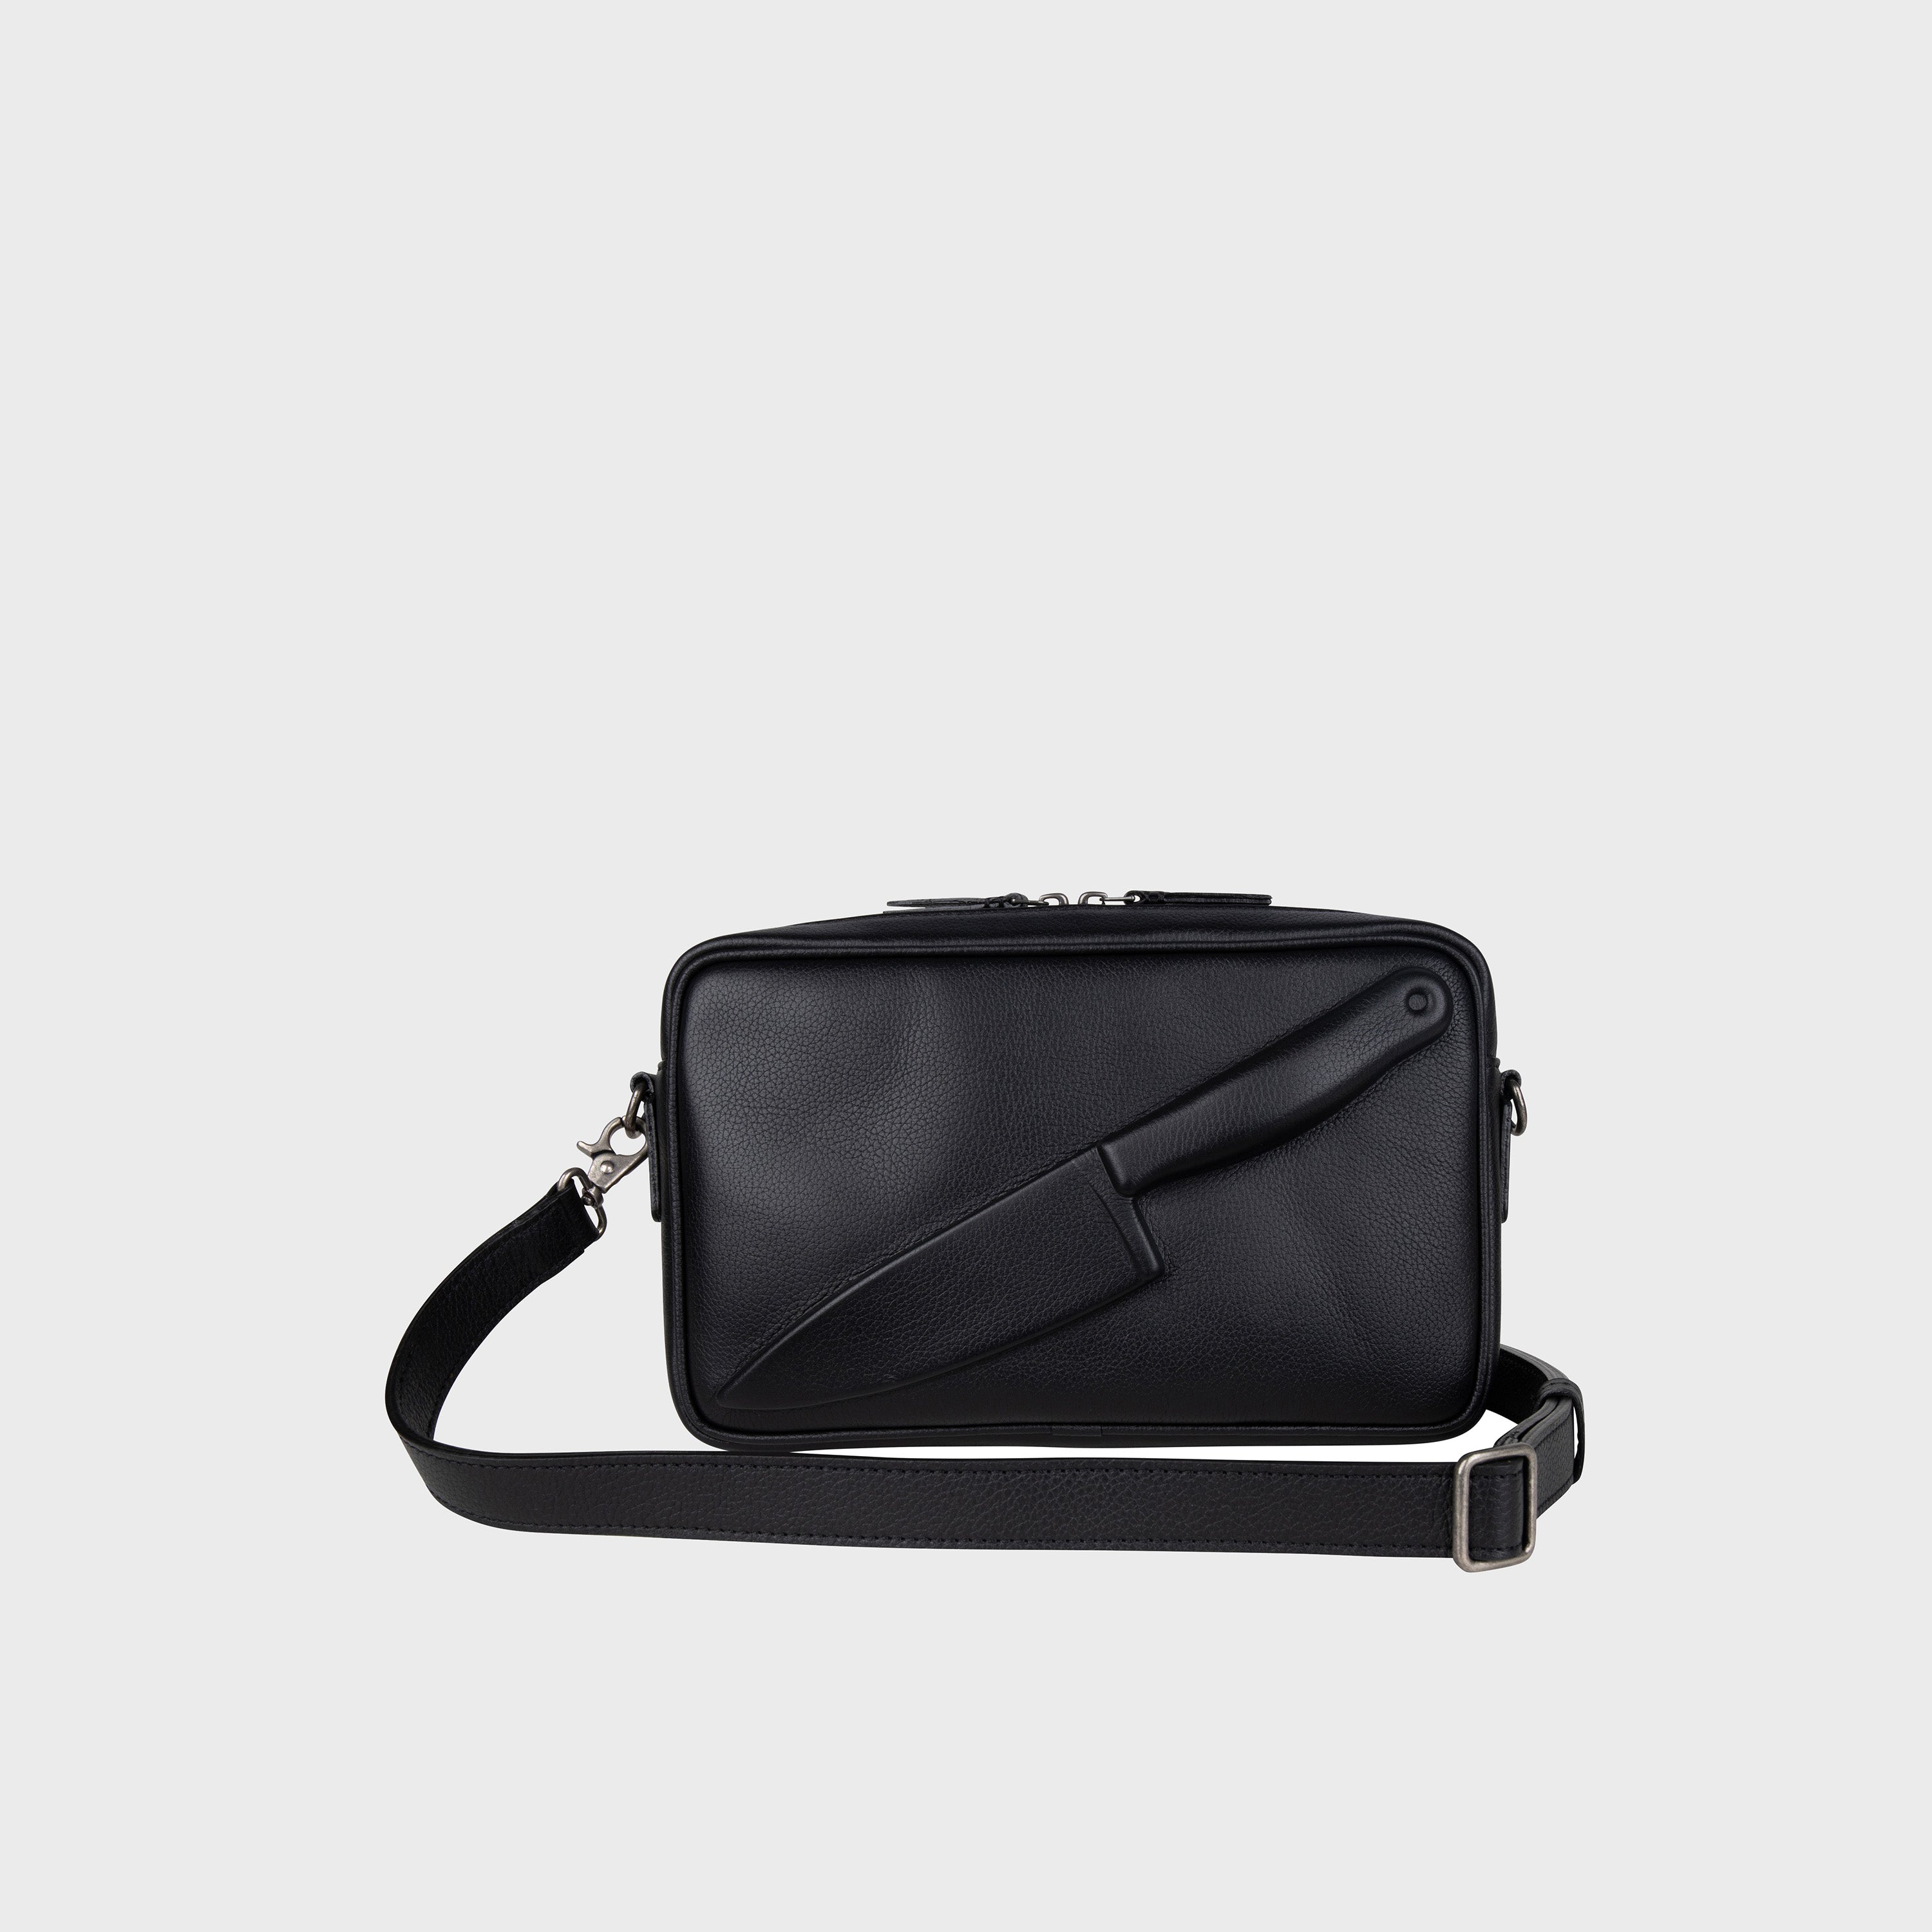 Vlieger & Vandam - Classic Small Knife Black, embossed leather bag